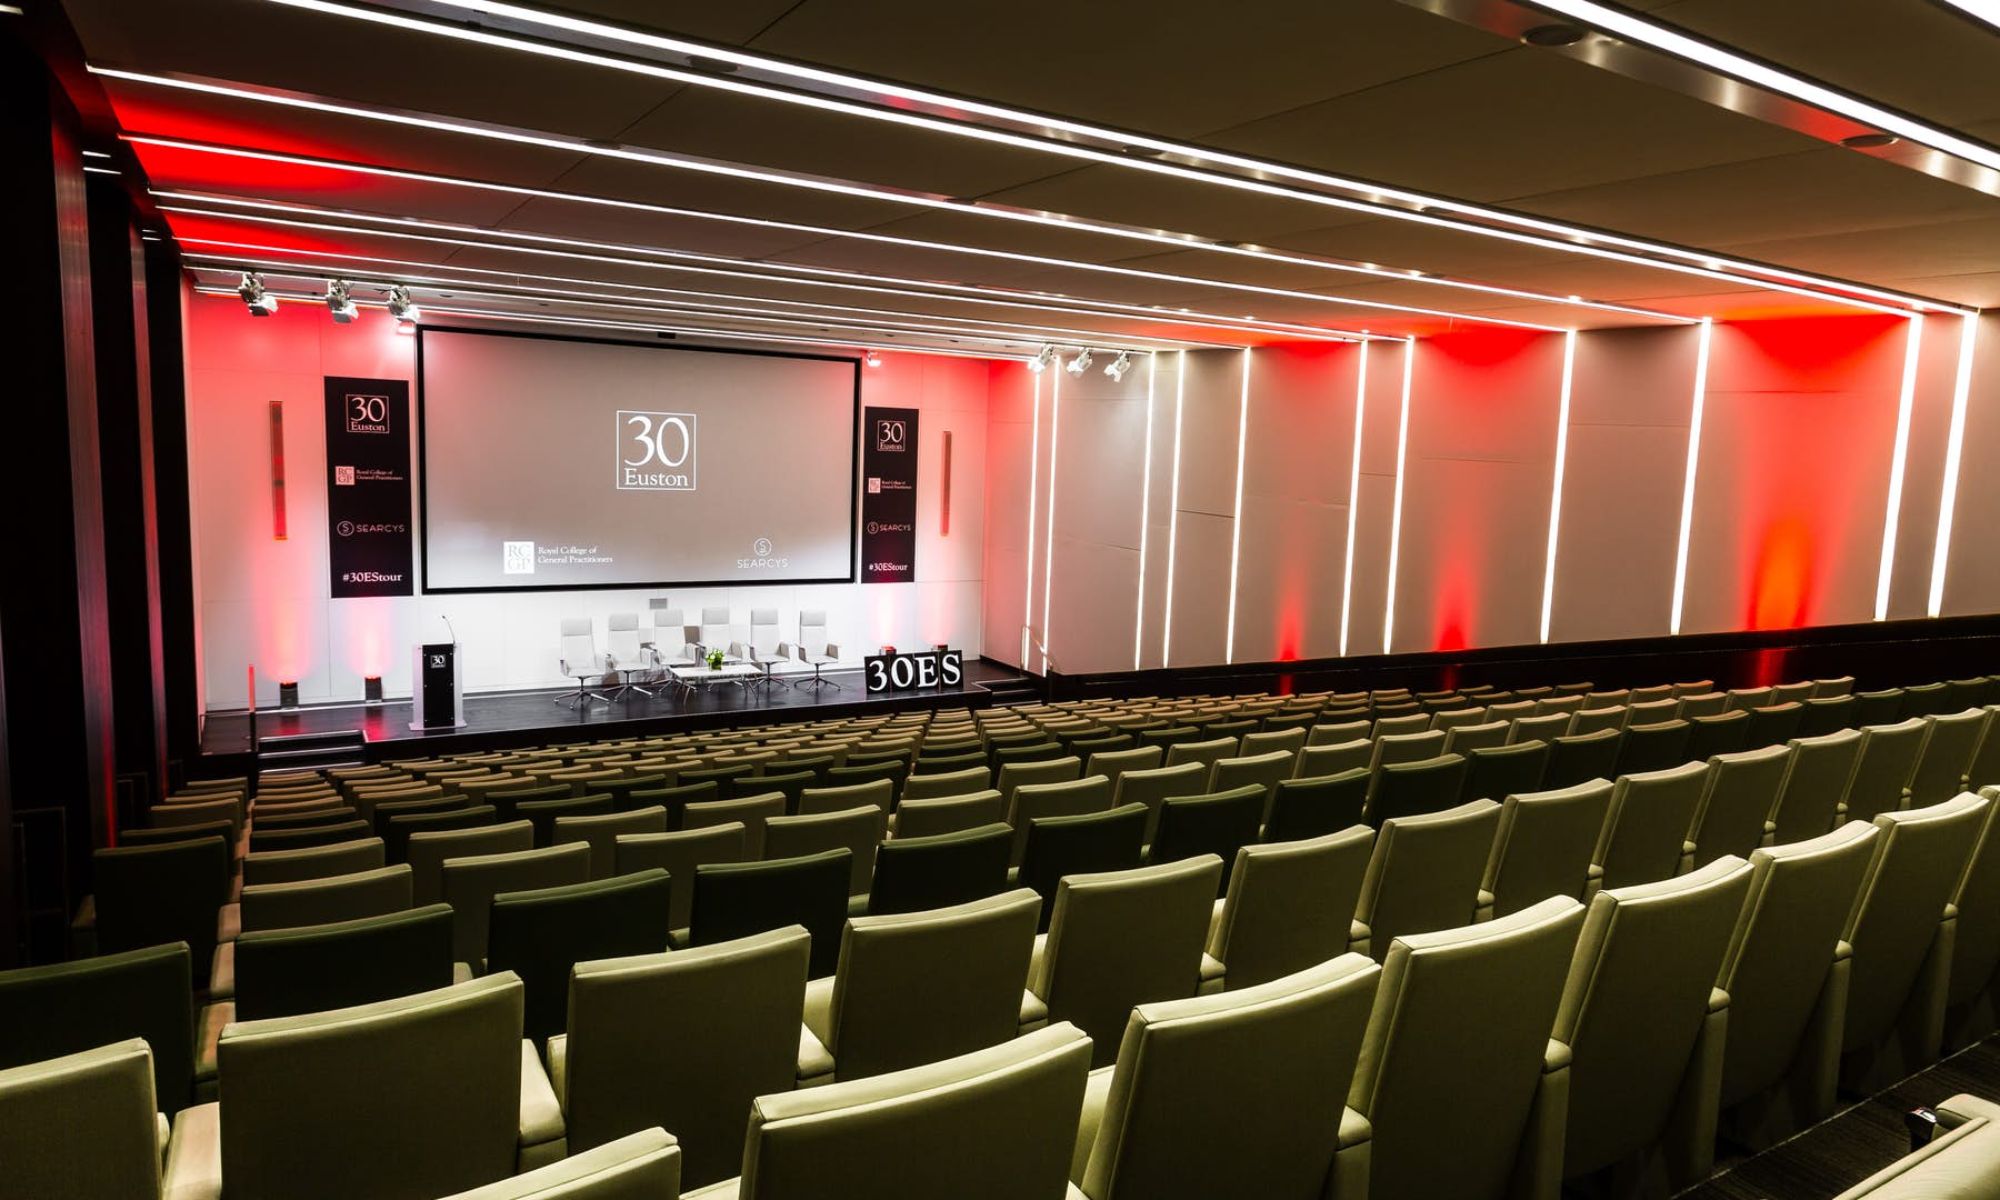 The Auditorium at 30 Euston Square empty room with red and white striped lighting